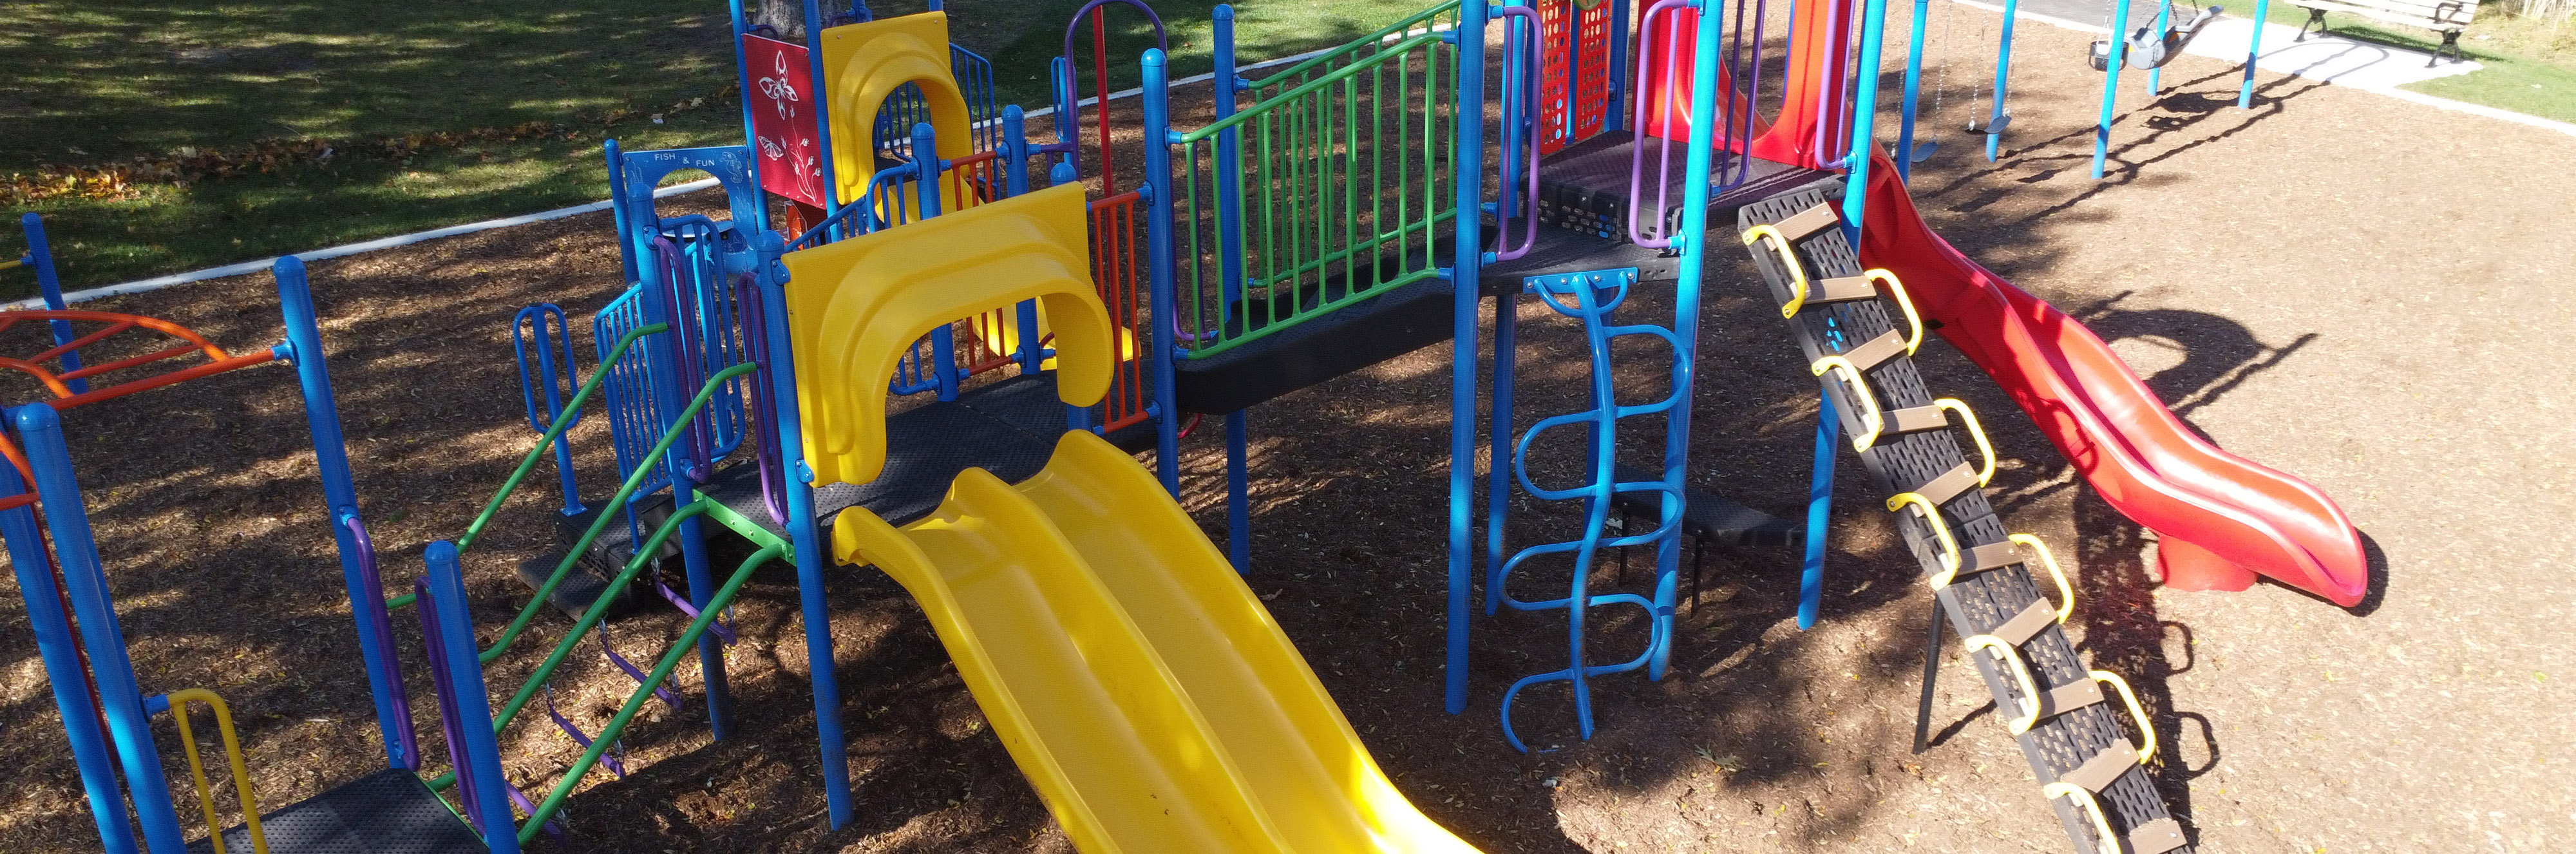 A photograph of Wanita Park Playground which shows the combine junior and senior play structure in the foreground and open law and mature trees surrounding the playground. The playground equipment is yellow and red.